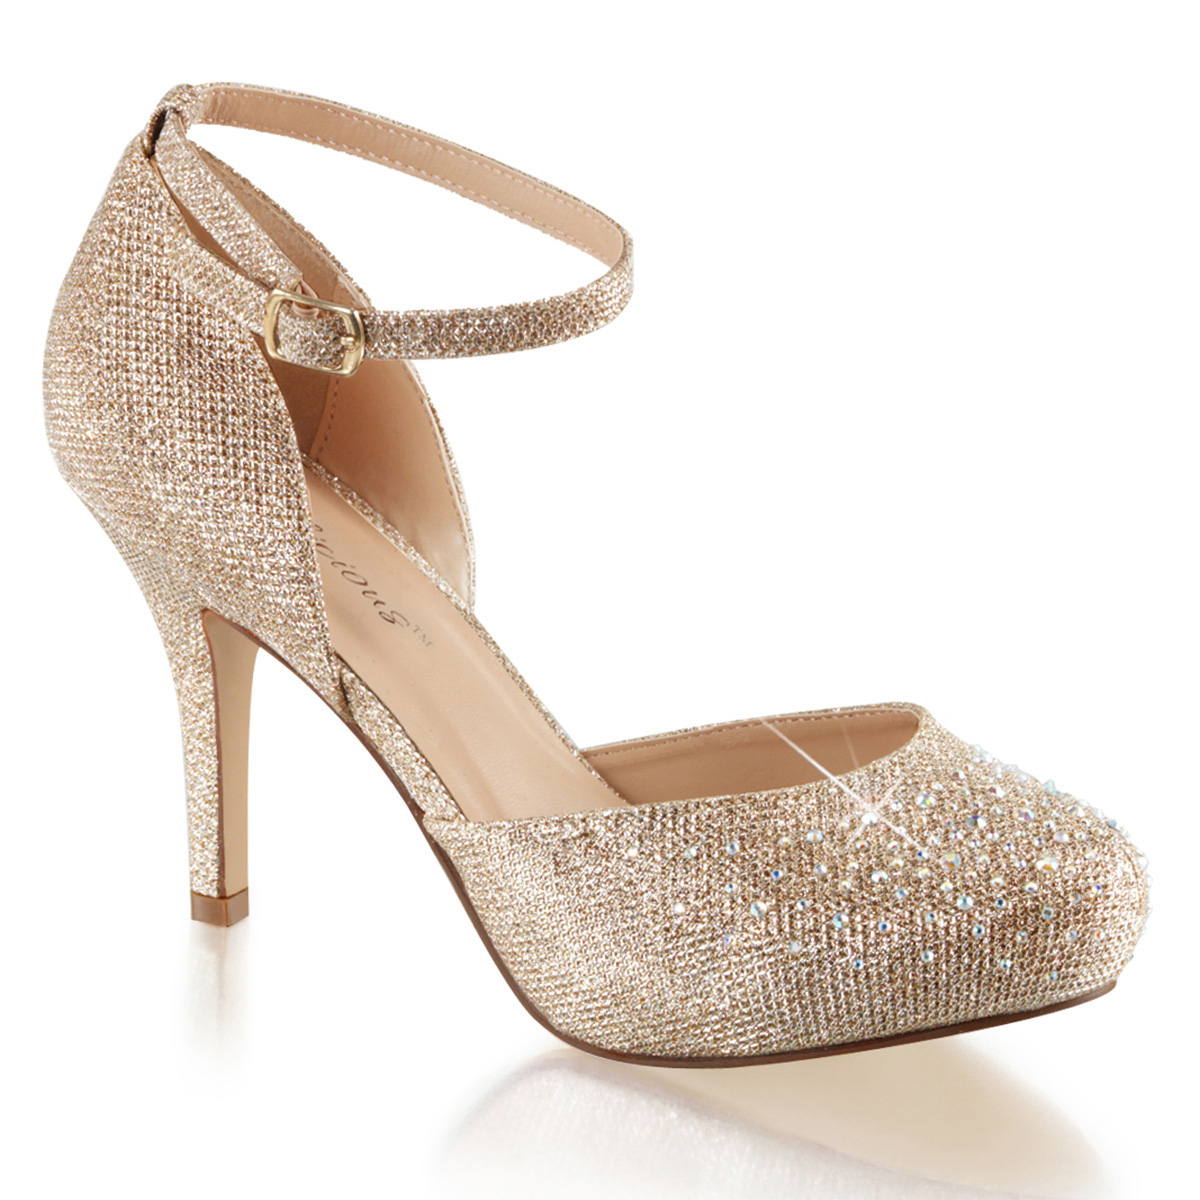 D'Orsay Pumps COVET-03 - Nude, Fabulicious